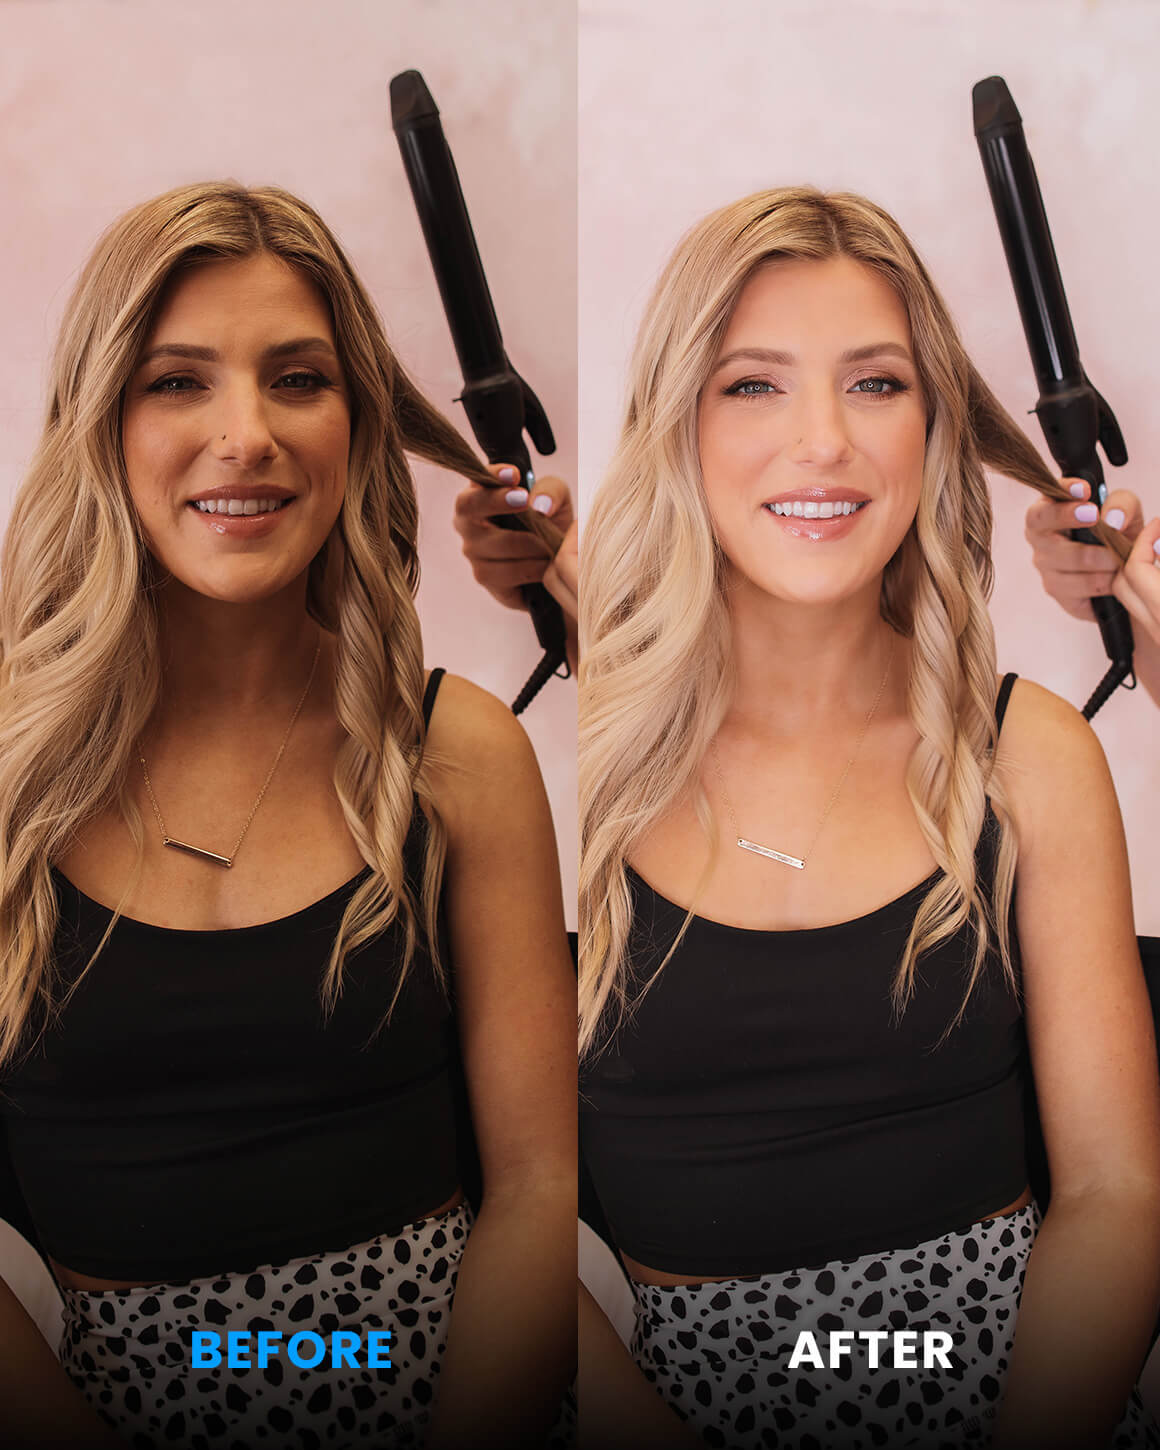 Side-by-side comparison of woman's appearance while getting hair styled with and without lighting from the Lume Cube Cordless 18" Ring Light.